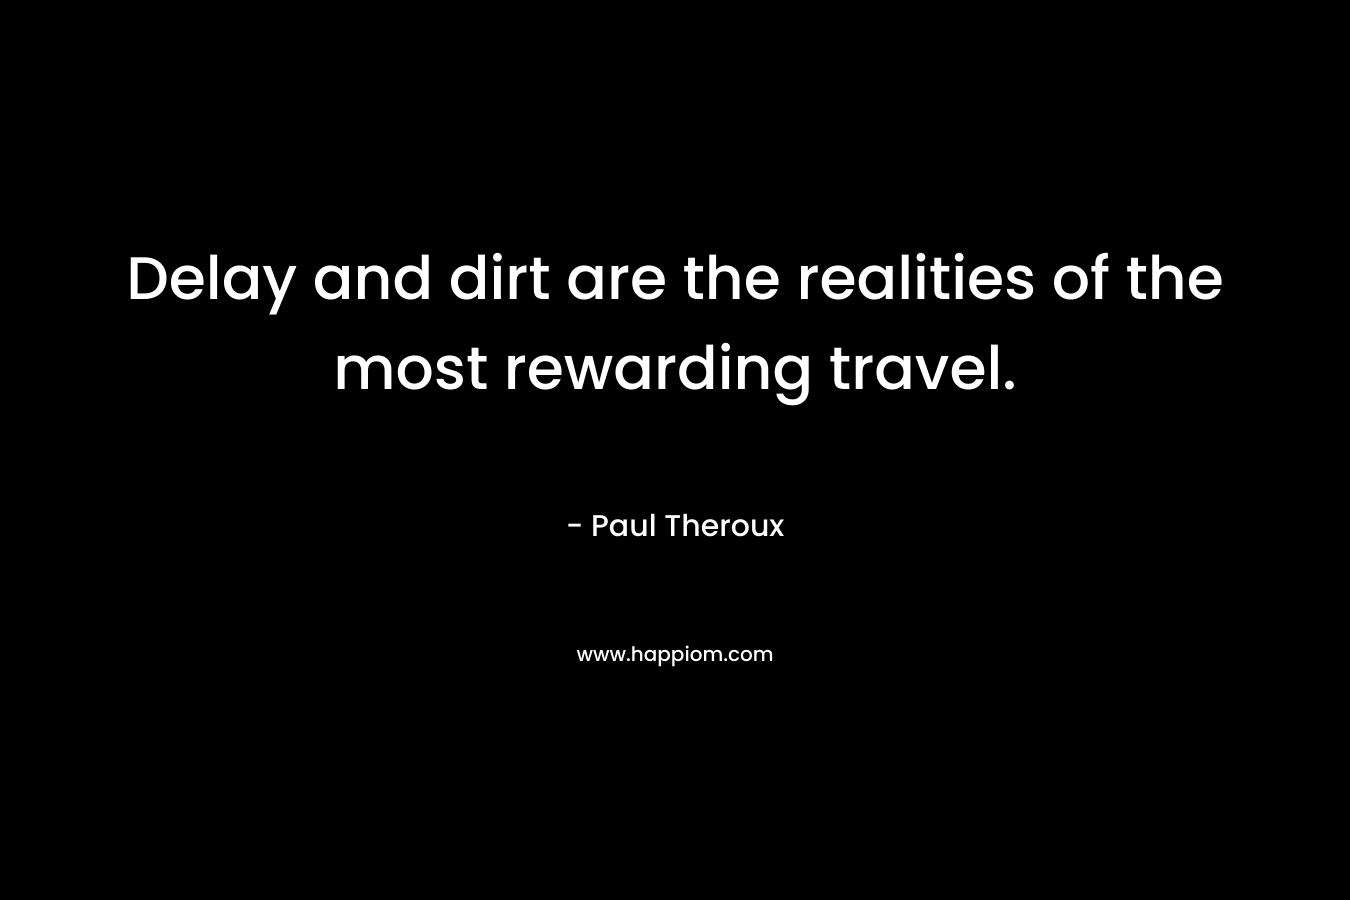 Delay and dirt are the realities of the most rewarding travel. – Paul Theroux